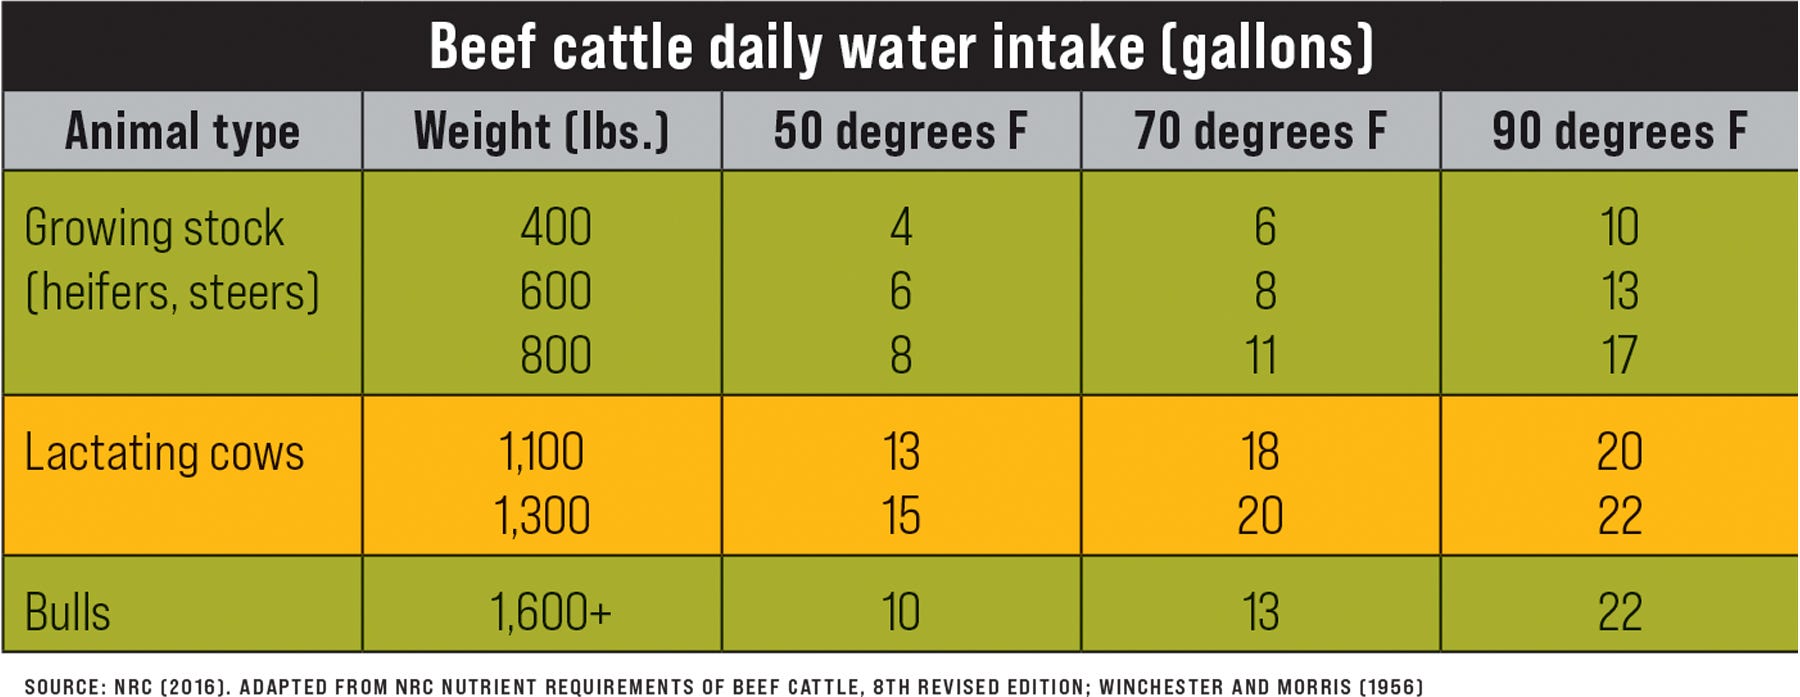 Beef cattle daily water intake (gallons) table